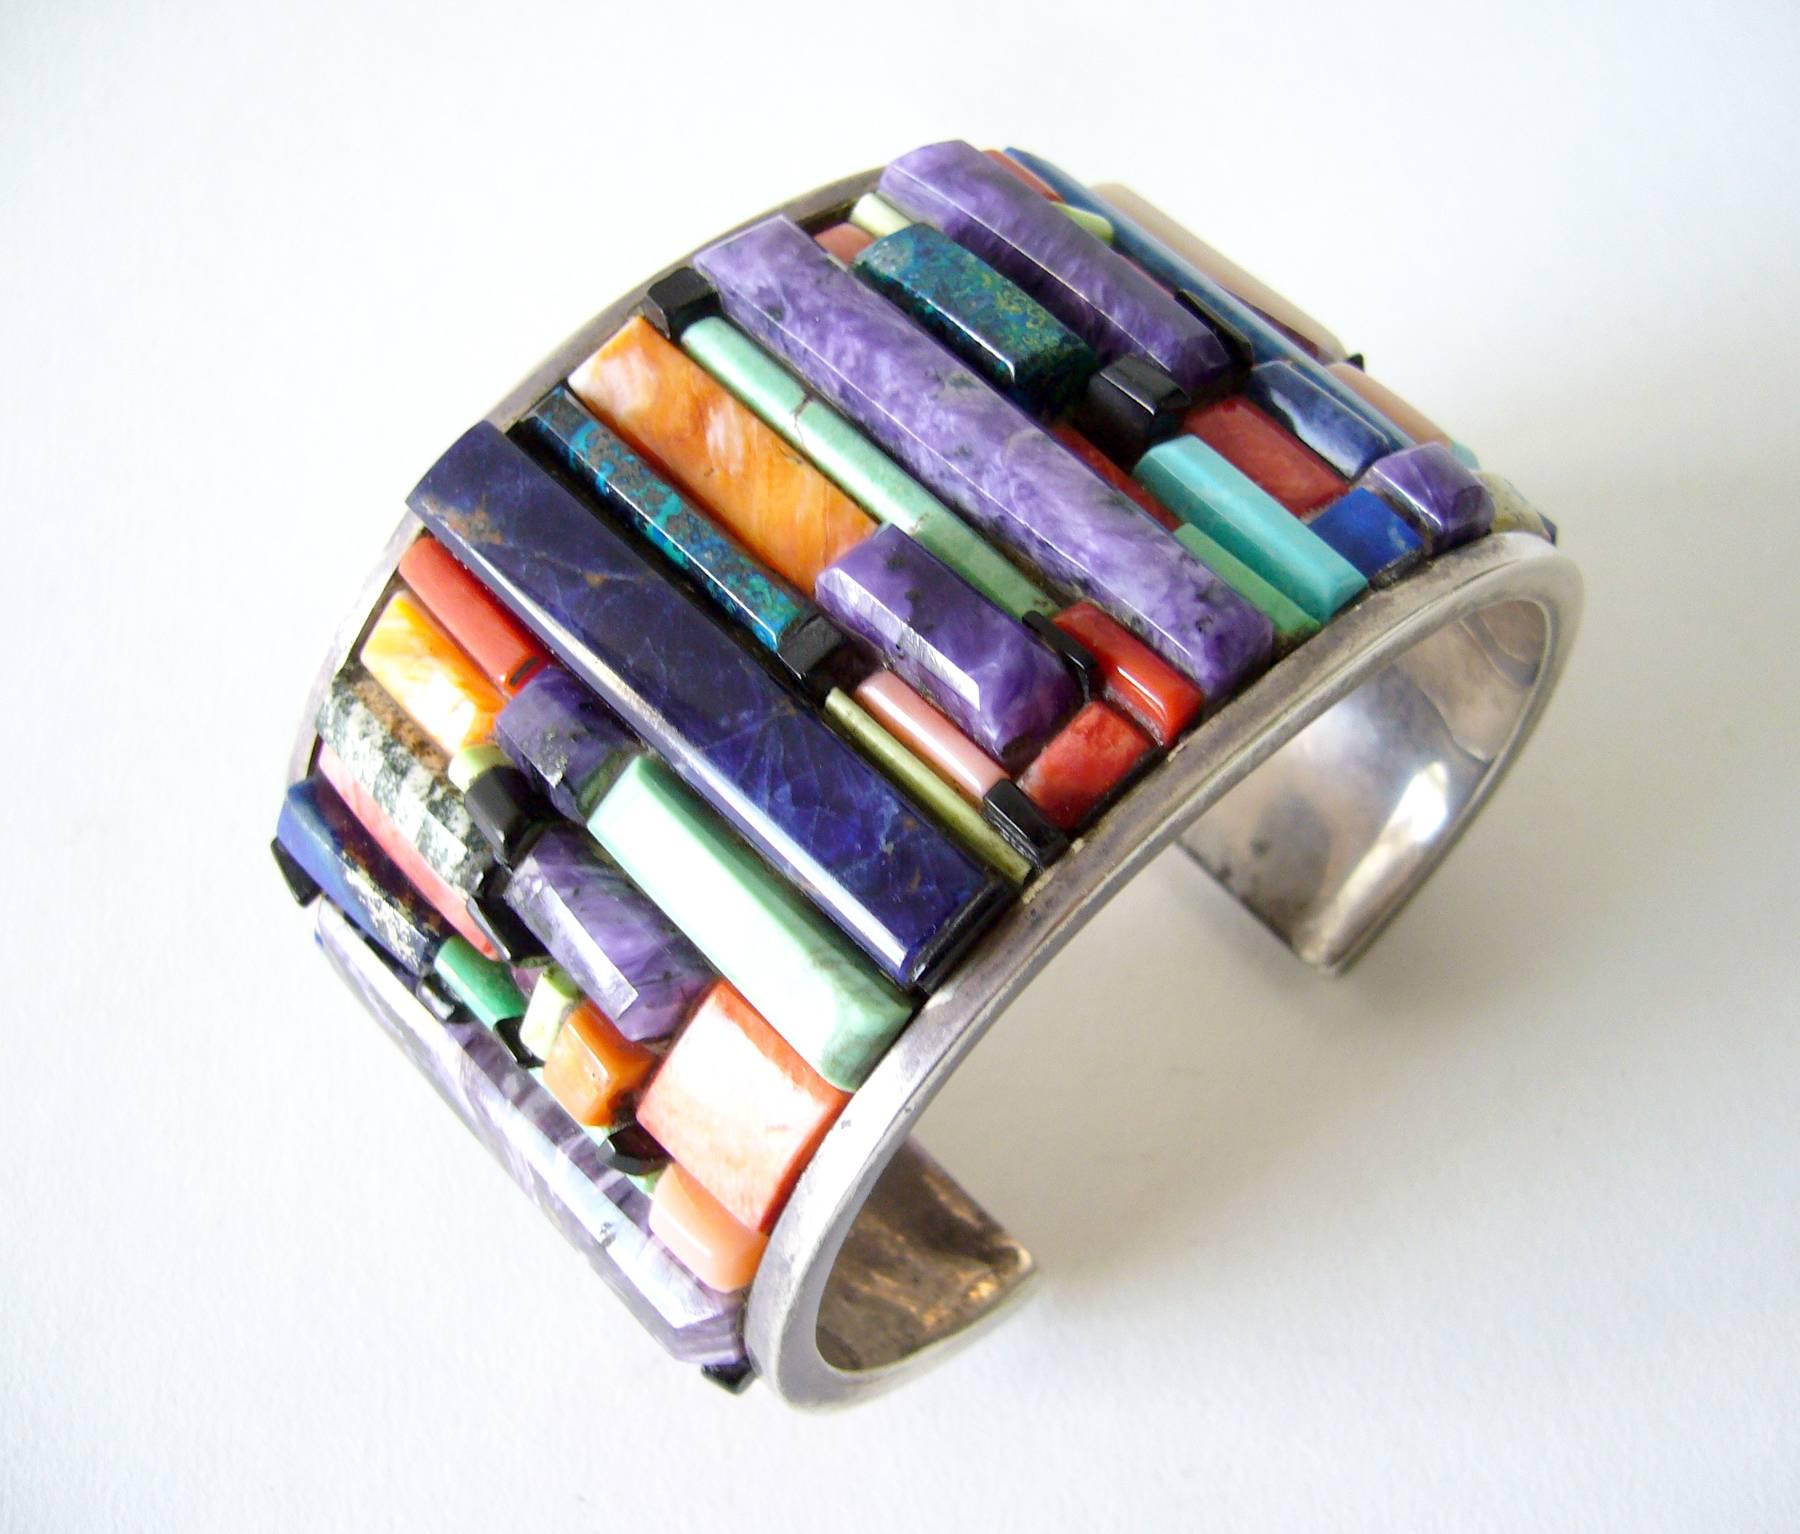 Large scale layered natural gemstone cuff bracelet created by Sedona, Arizona metalsmith Don Staats. Many rare, semiprecious stacked gemstones include turquoise, lapis lazuli, coral, jet, shell and more.  Bracelet measures 2.25